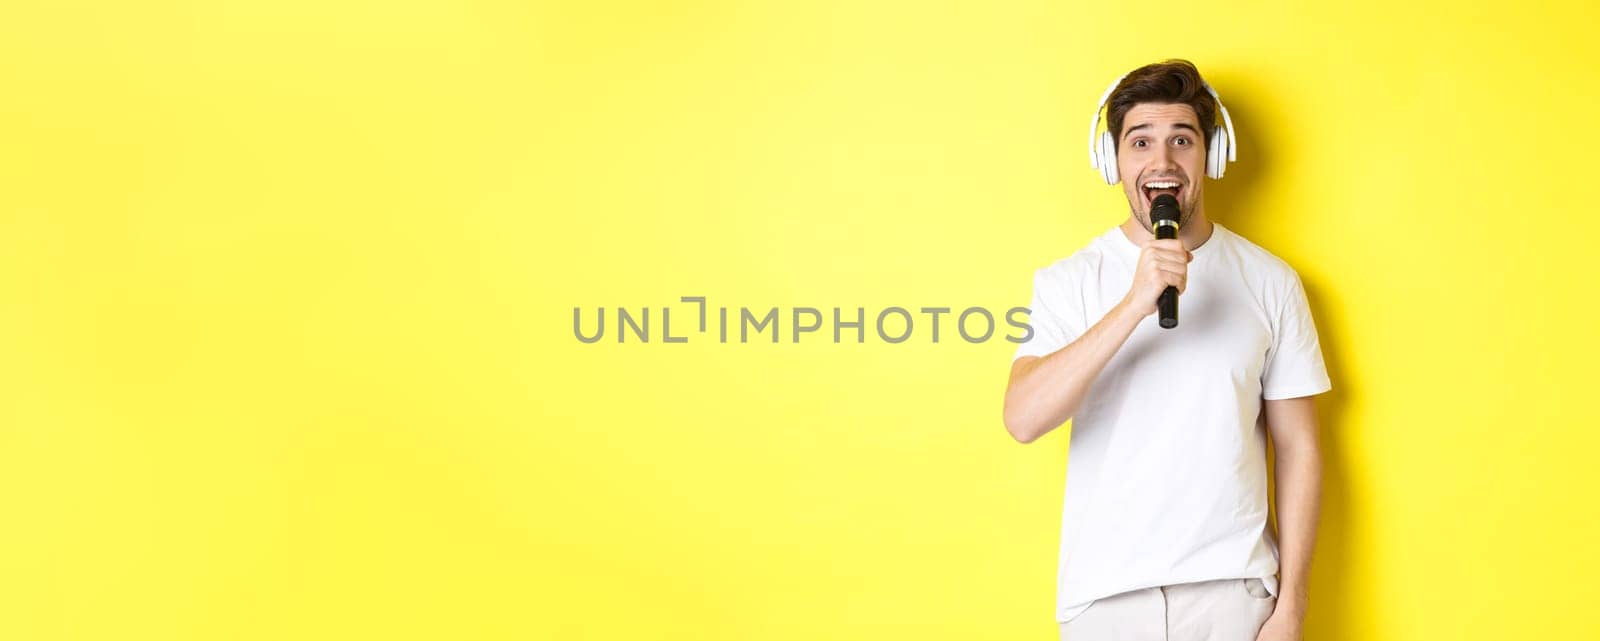 Man in headphones holding microphone, singing karaoke song, standing over yellow background in white clothes.